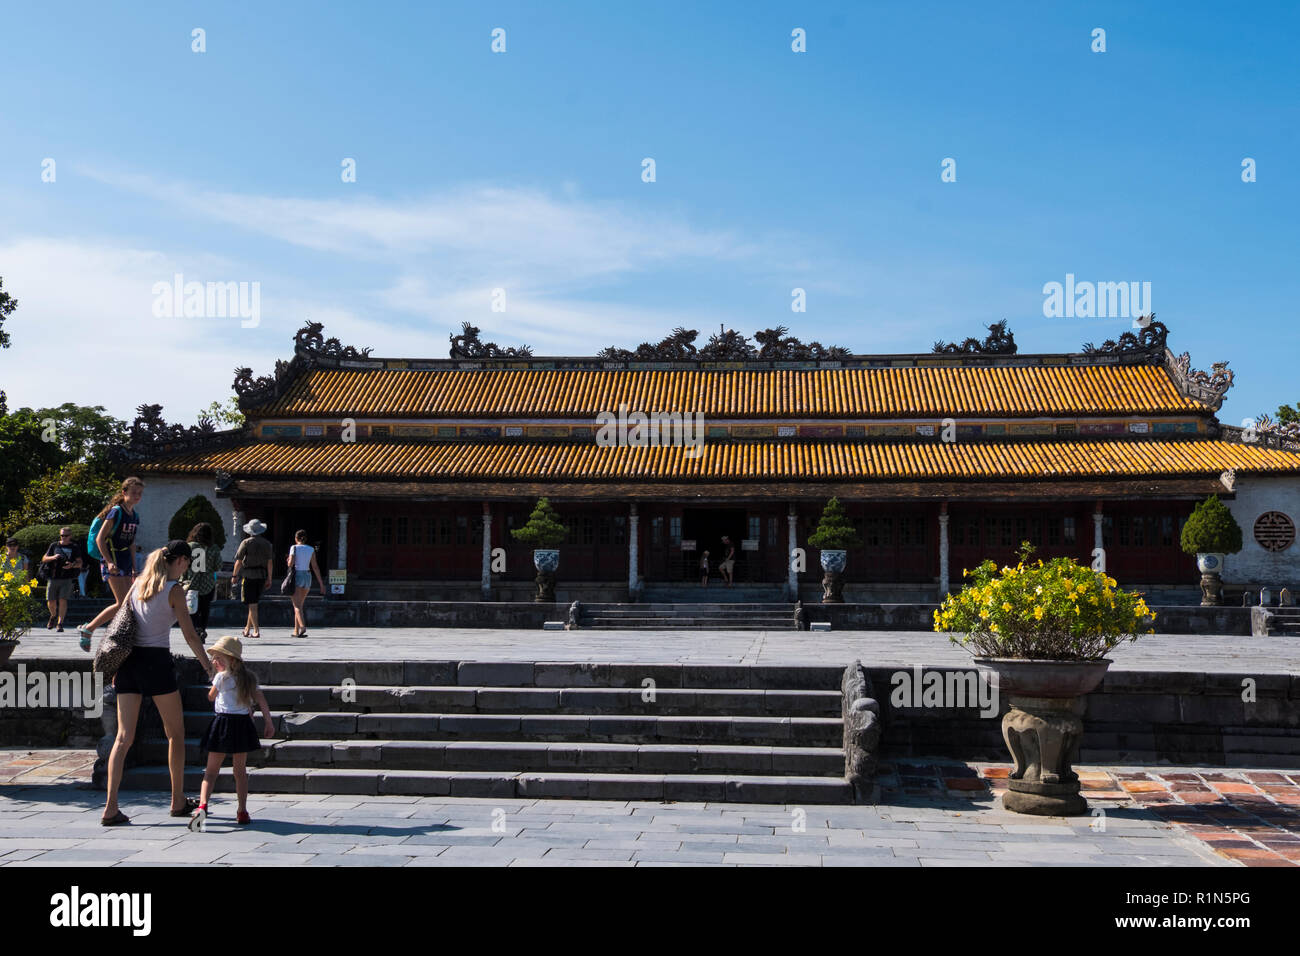 Thai Hoa Palace Inside the walled citadel Kinh Thanh the Imperial City Hue Vietnam Asia  Hoang thanh UNESCO World Heritage Site Stock Photo